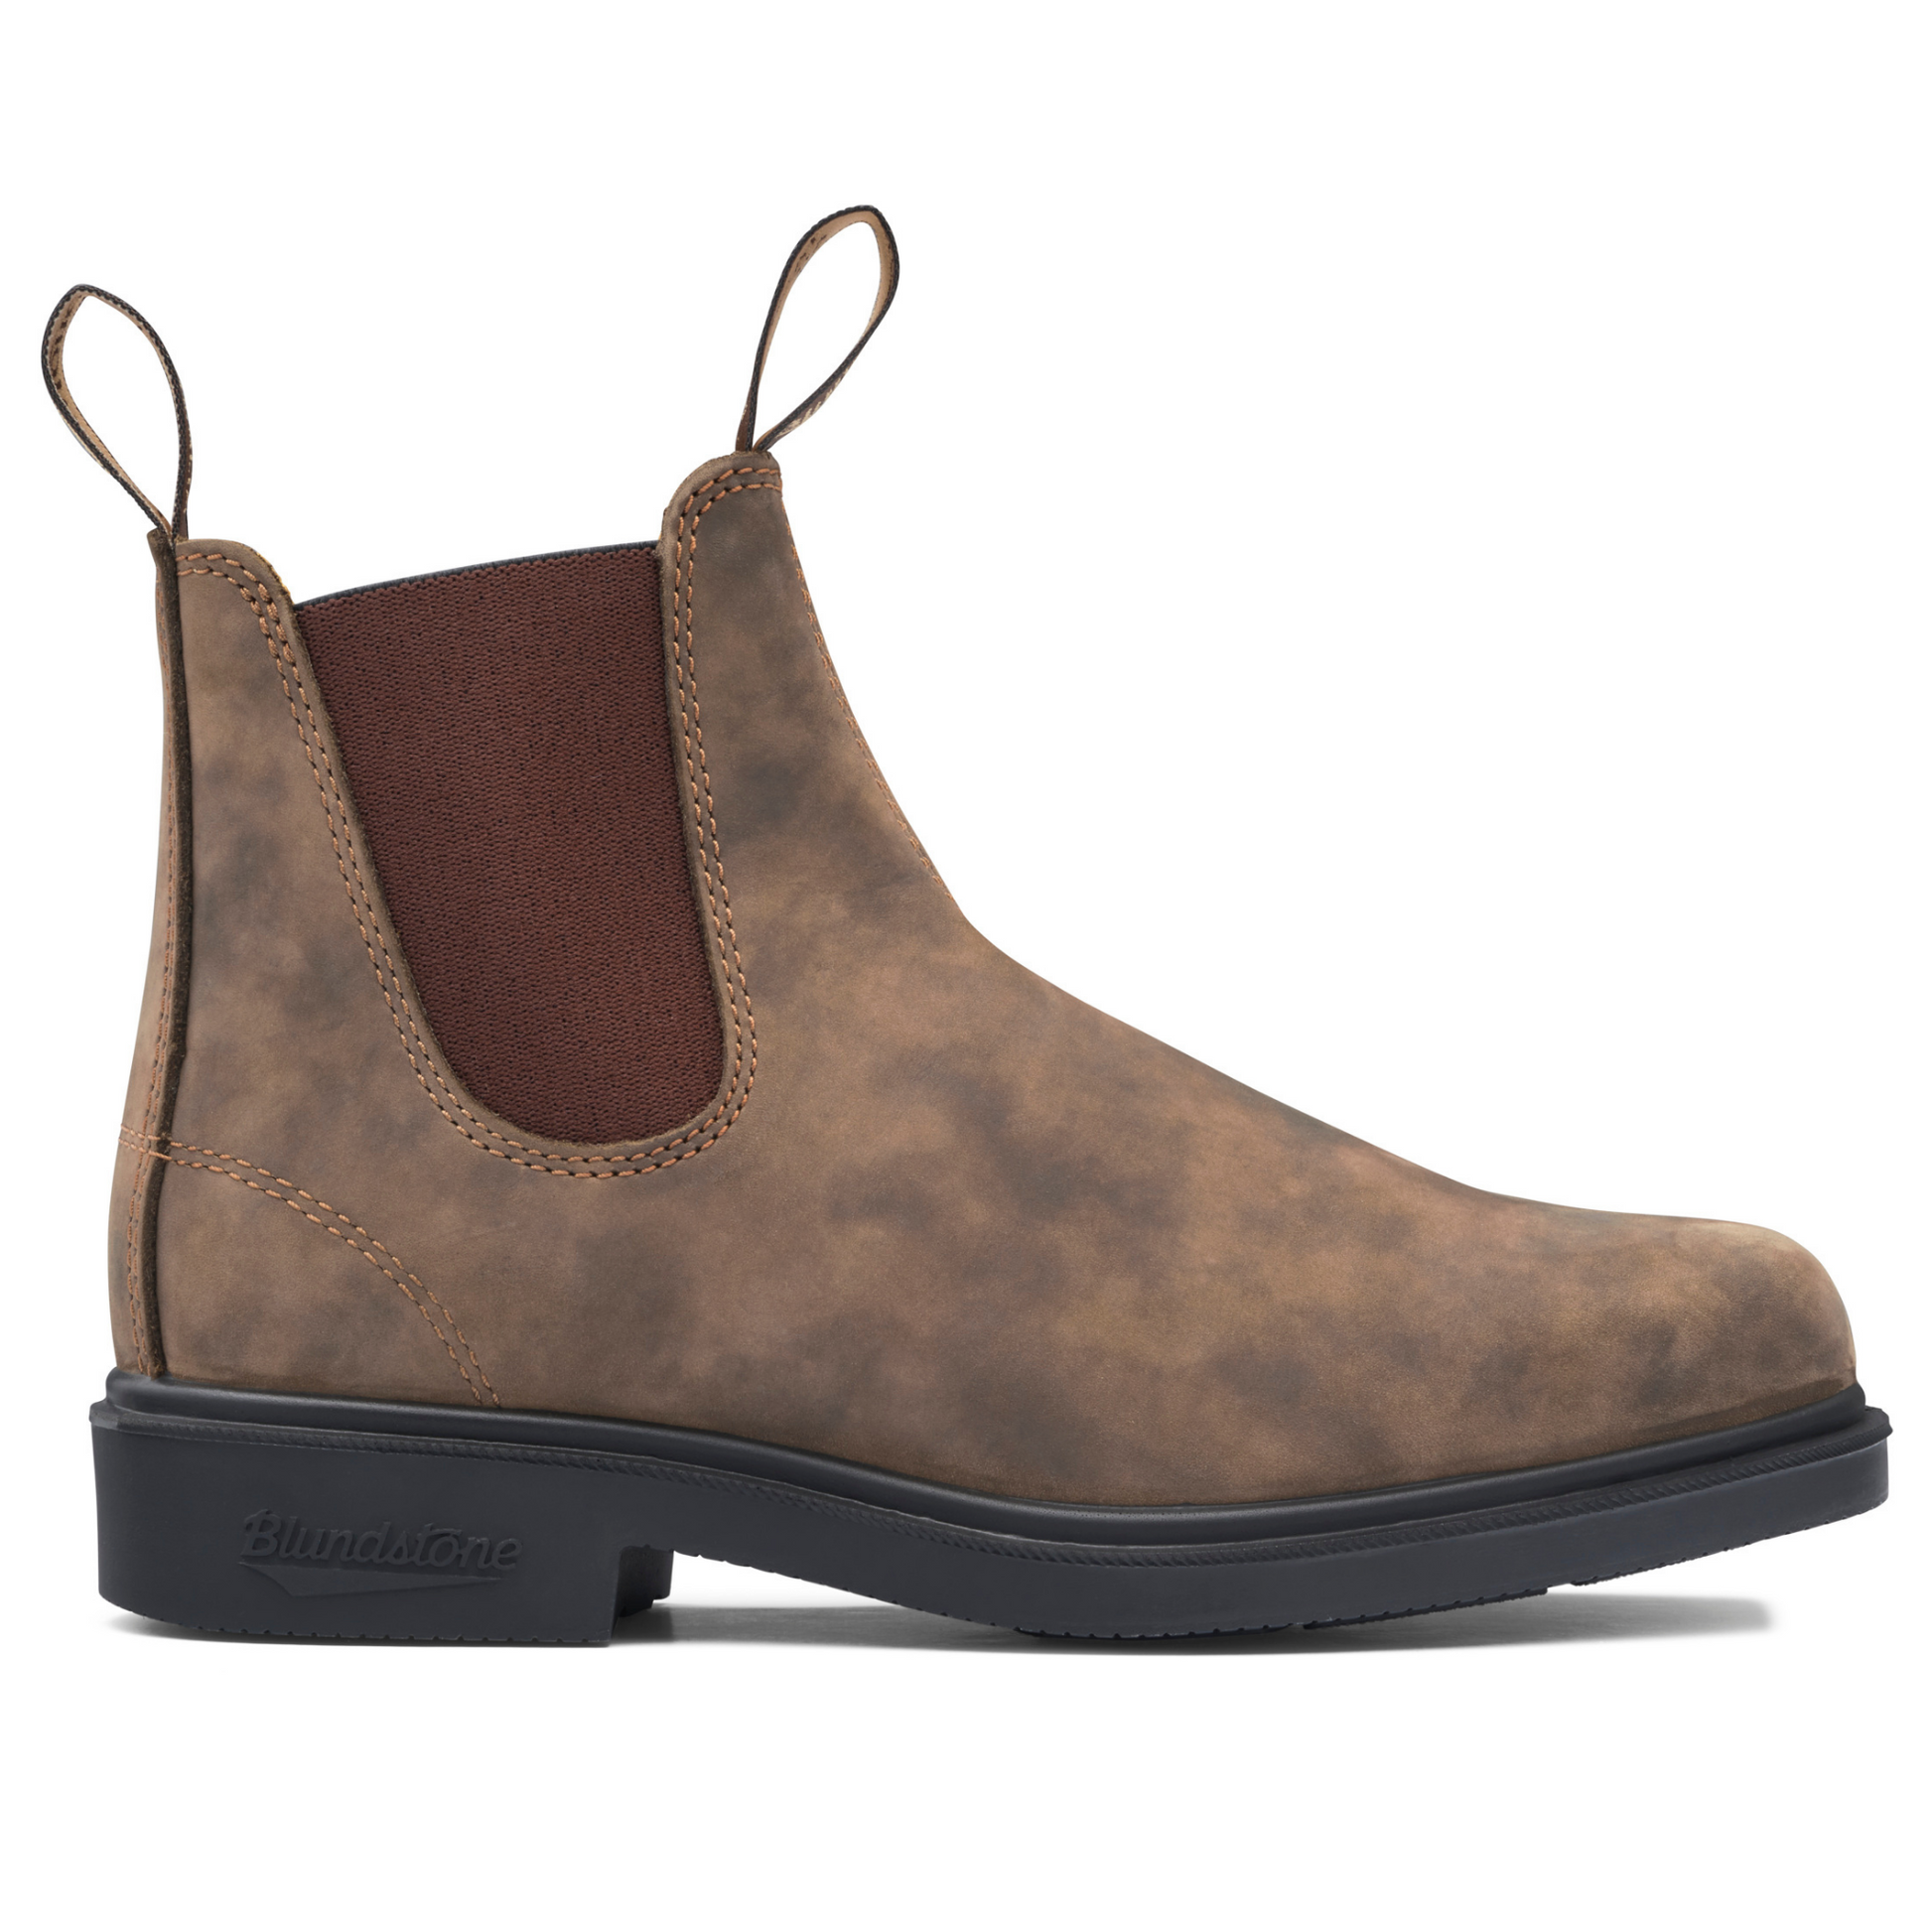 A profile view of the right boot. Rustic brown coloured leather with a black sole.